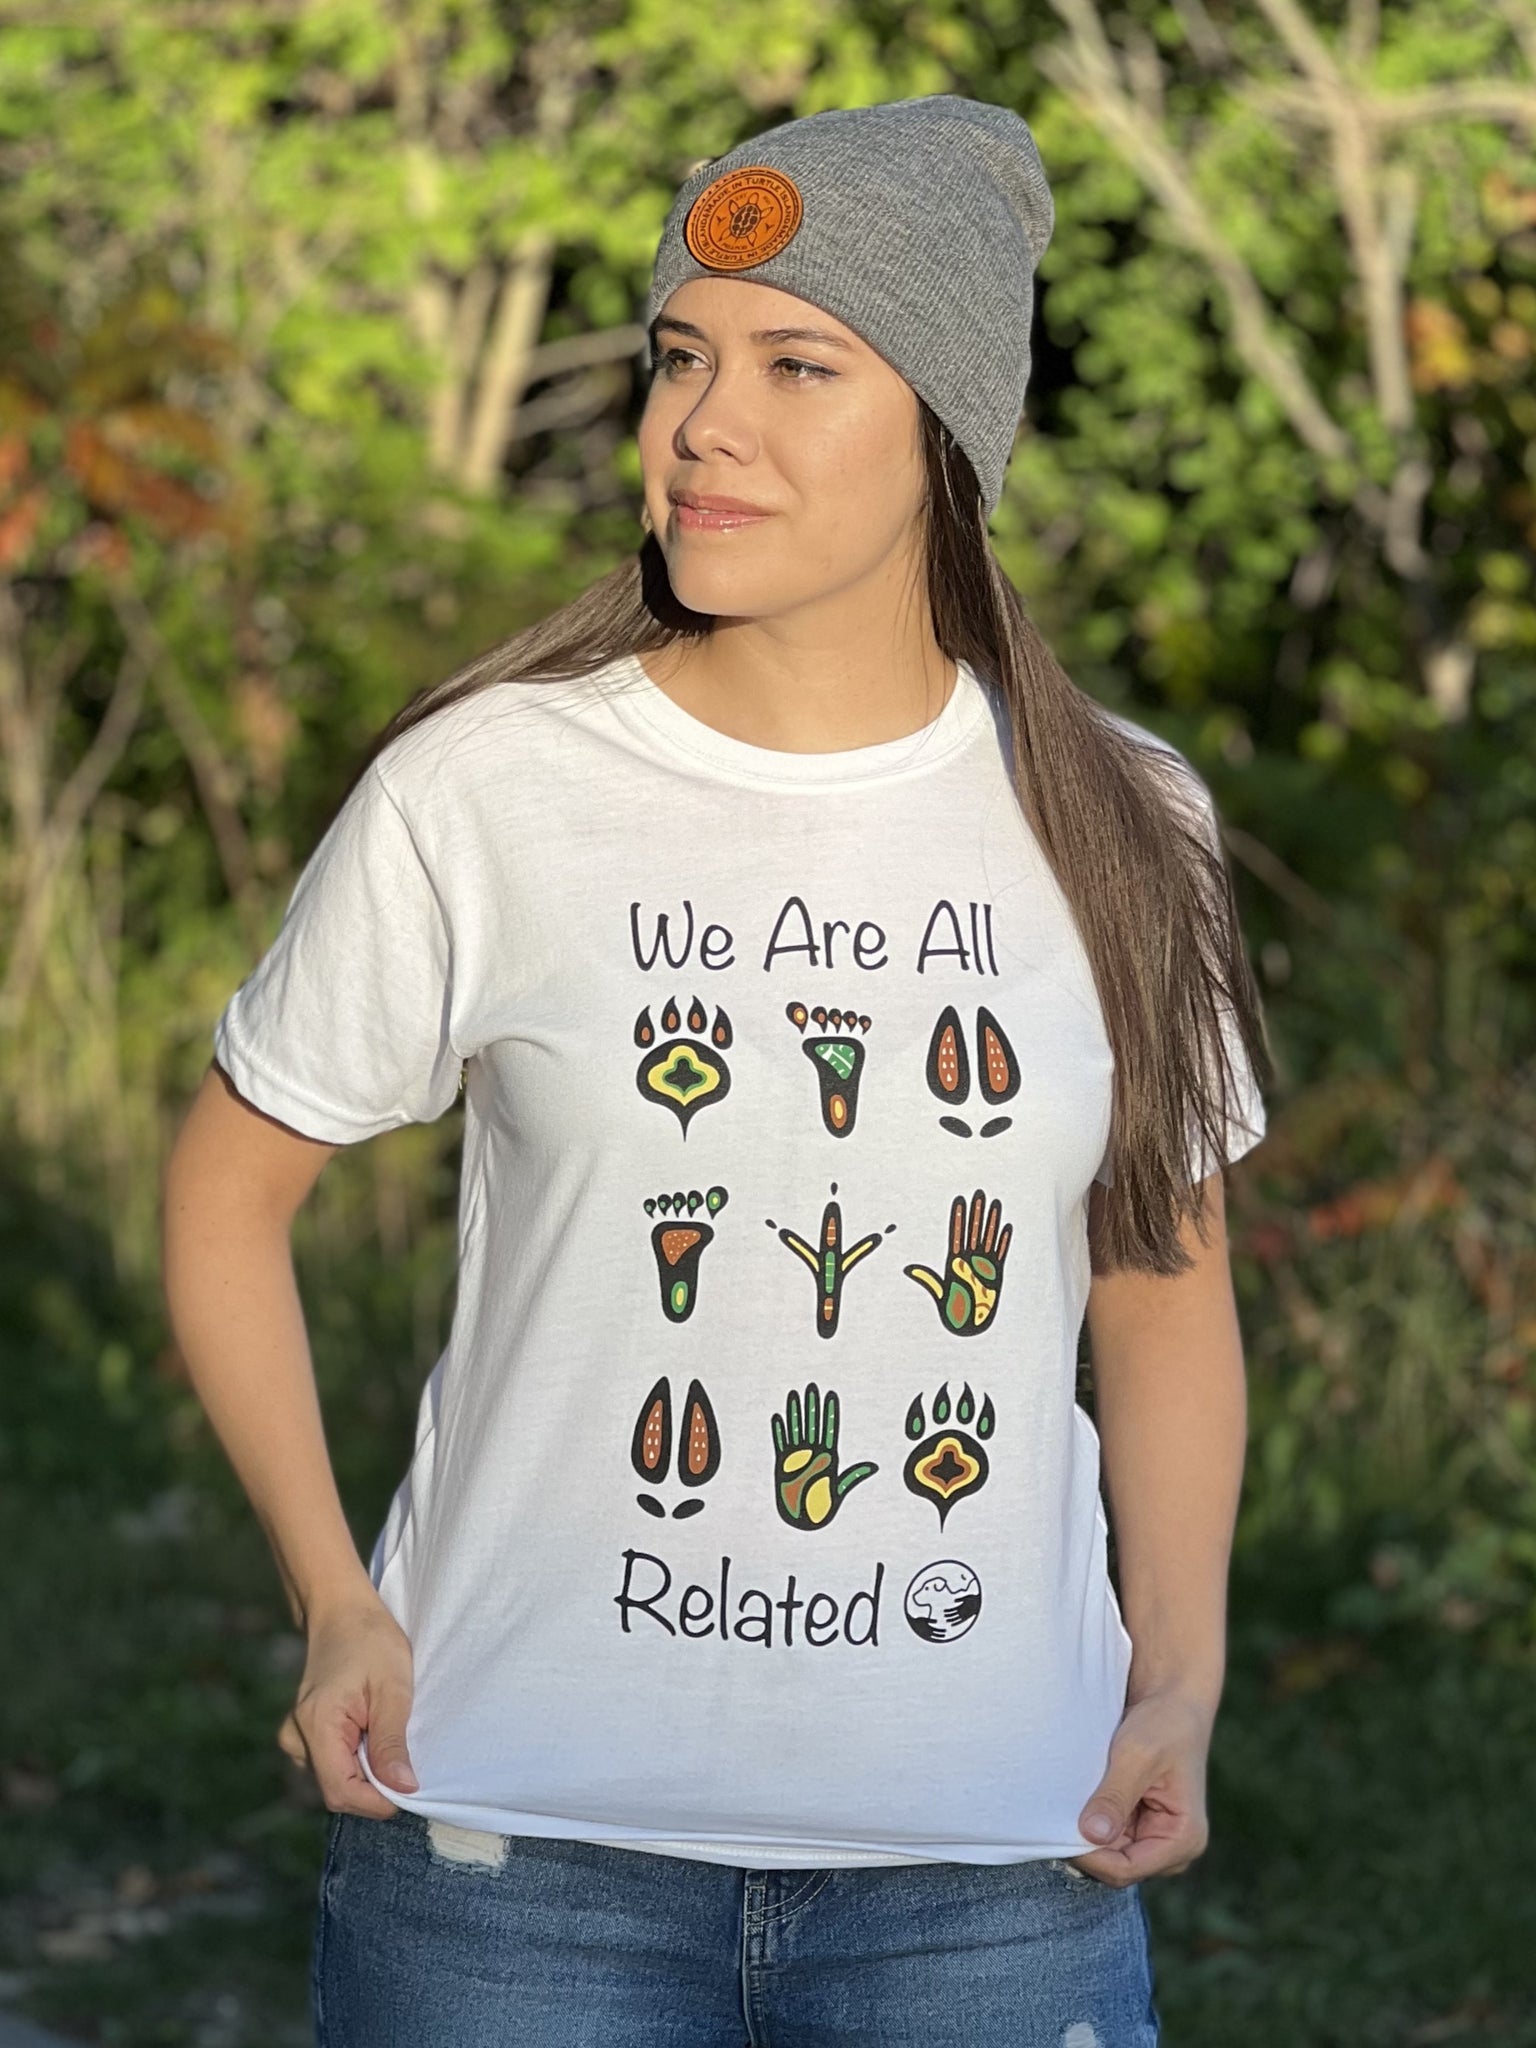 Pre & Peri - We Are All Related T-Shirt Multi-colour Print - Adult